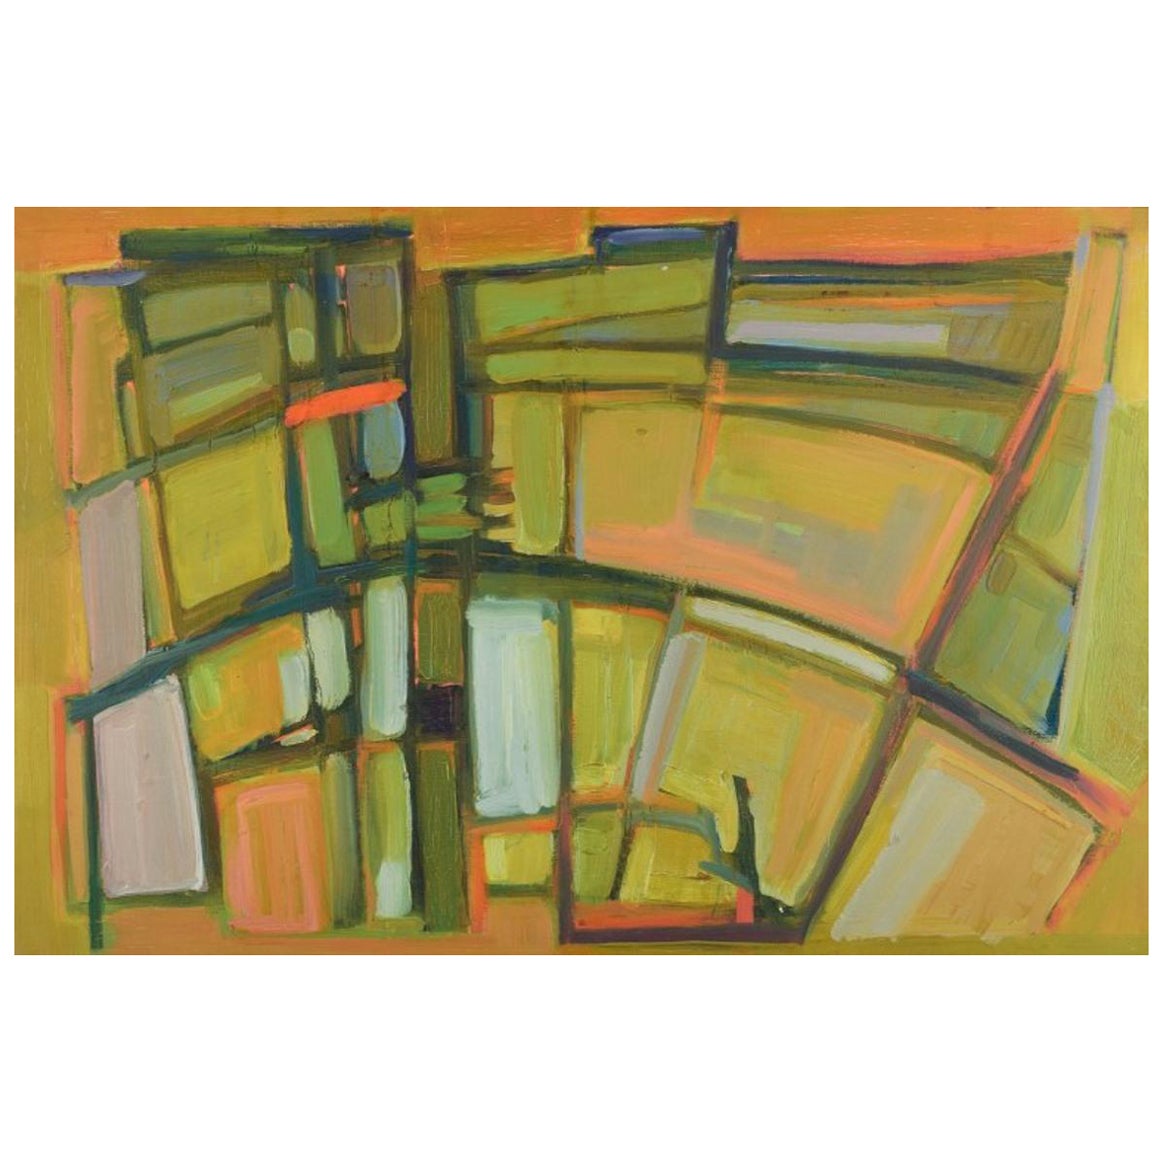 Monique Beucher, French artist. Oil on canvas. Abstract composition. 1980s